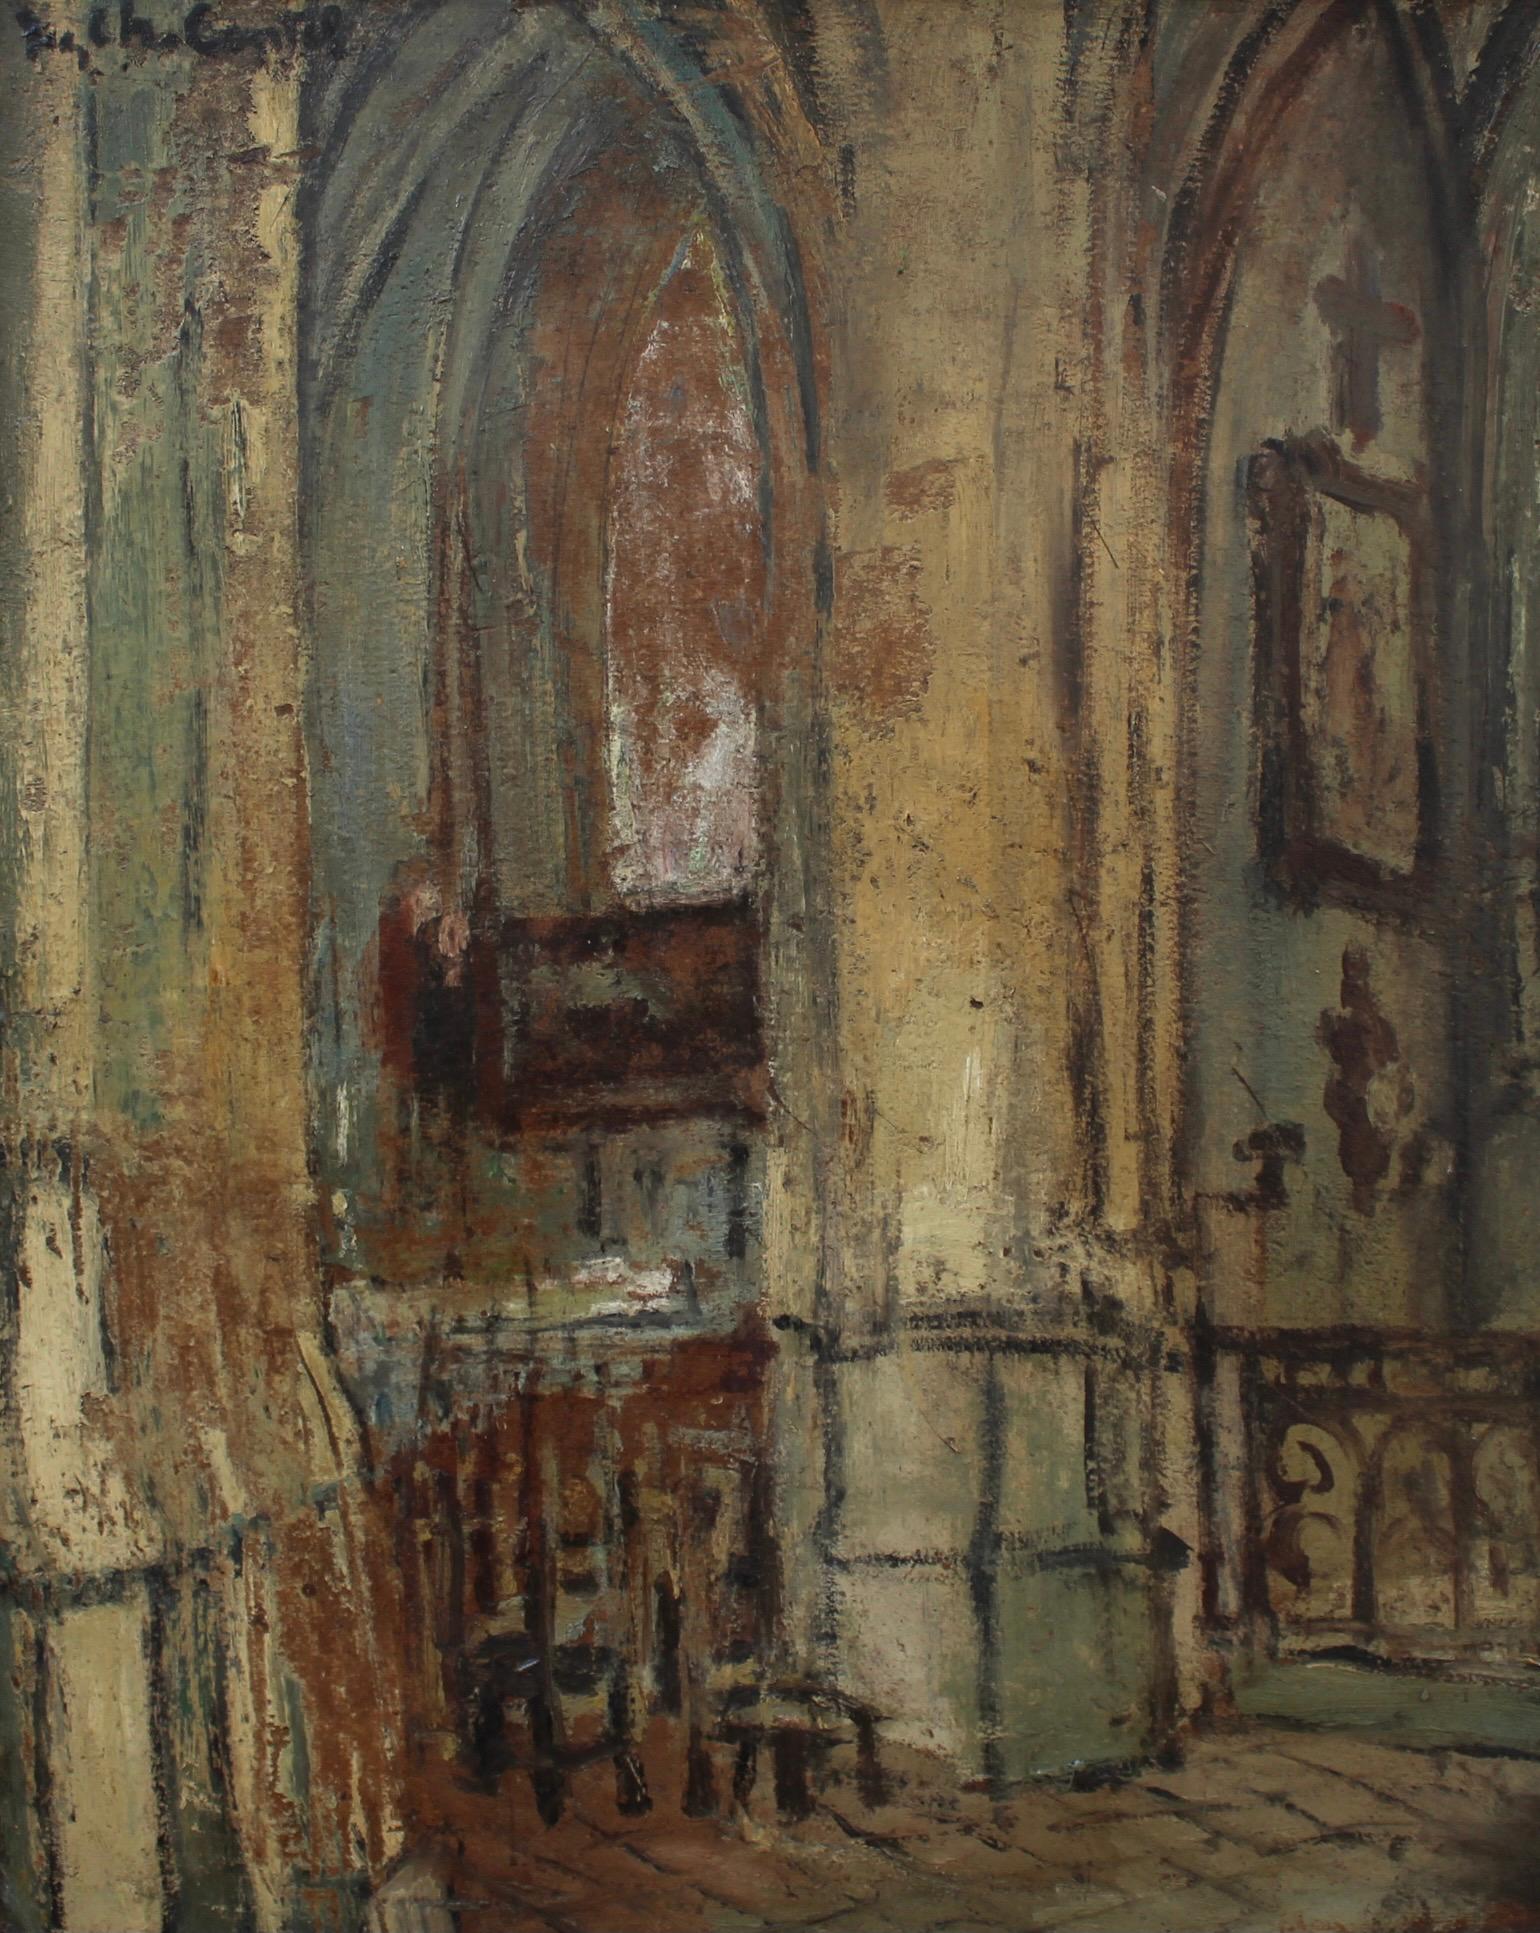 Church Interior - Brown Interior Painting by Jean-Charles Contel